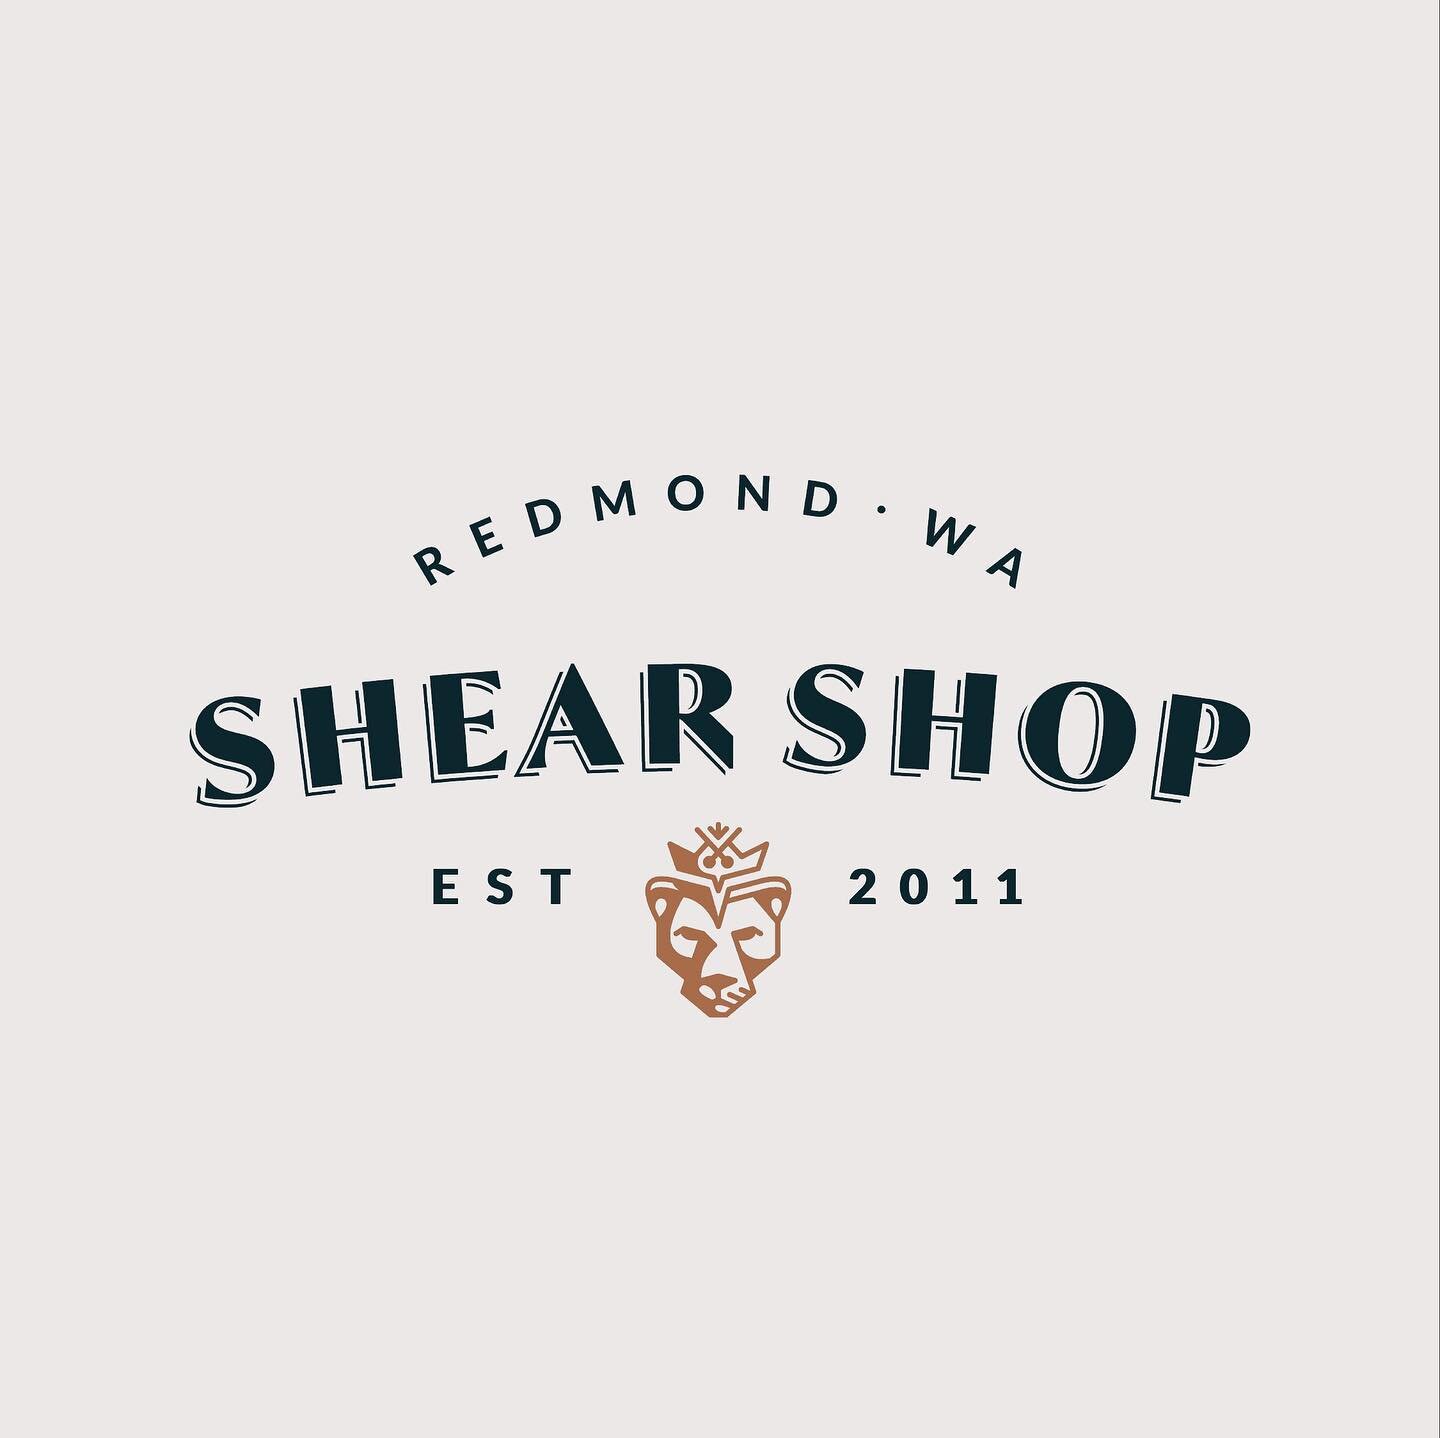 Another logo recently completed. Man oh man am I so excited to be working with more and more creative people. @shearshop is a local salon that's been around forever and has the most inspiring history. A wonderful woman working to provide security for